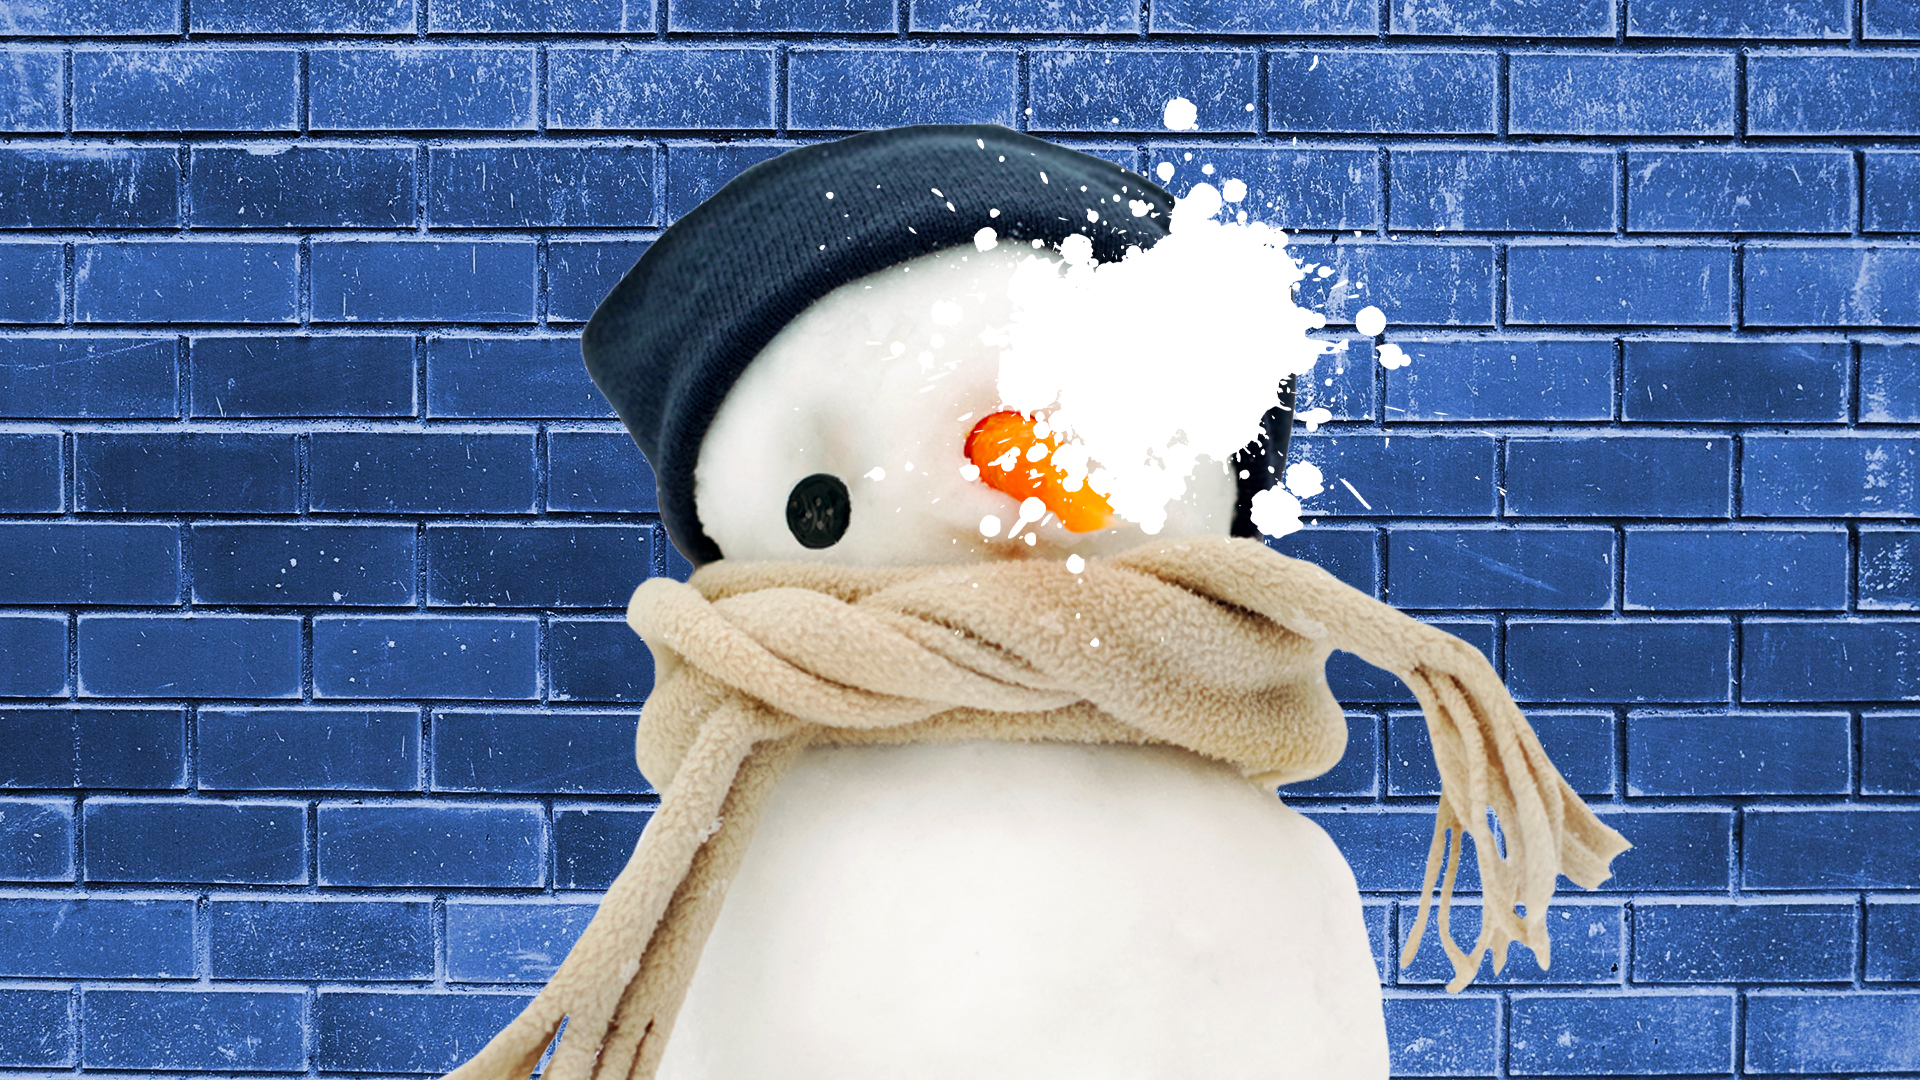 A snowman getting hit with a snowball